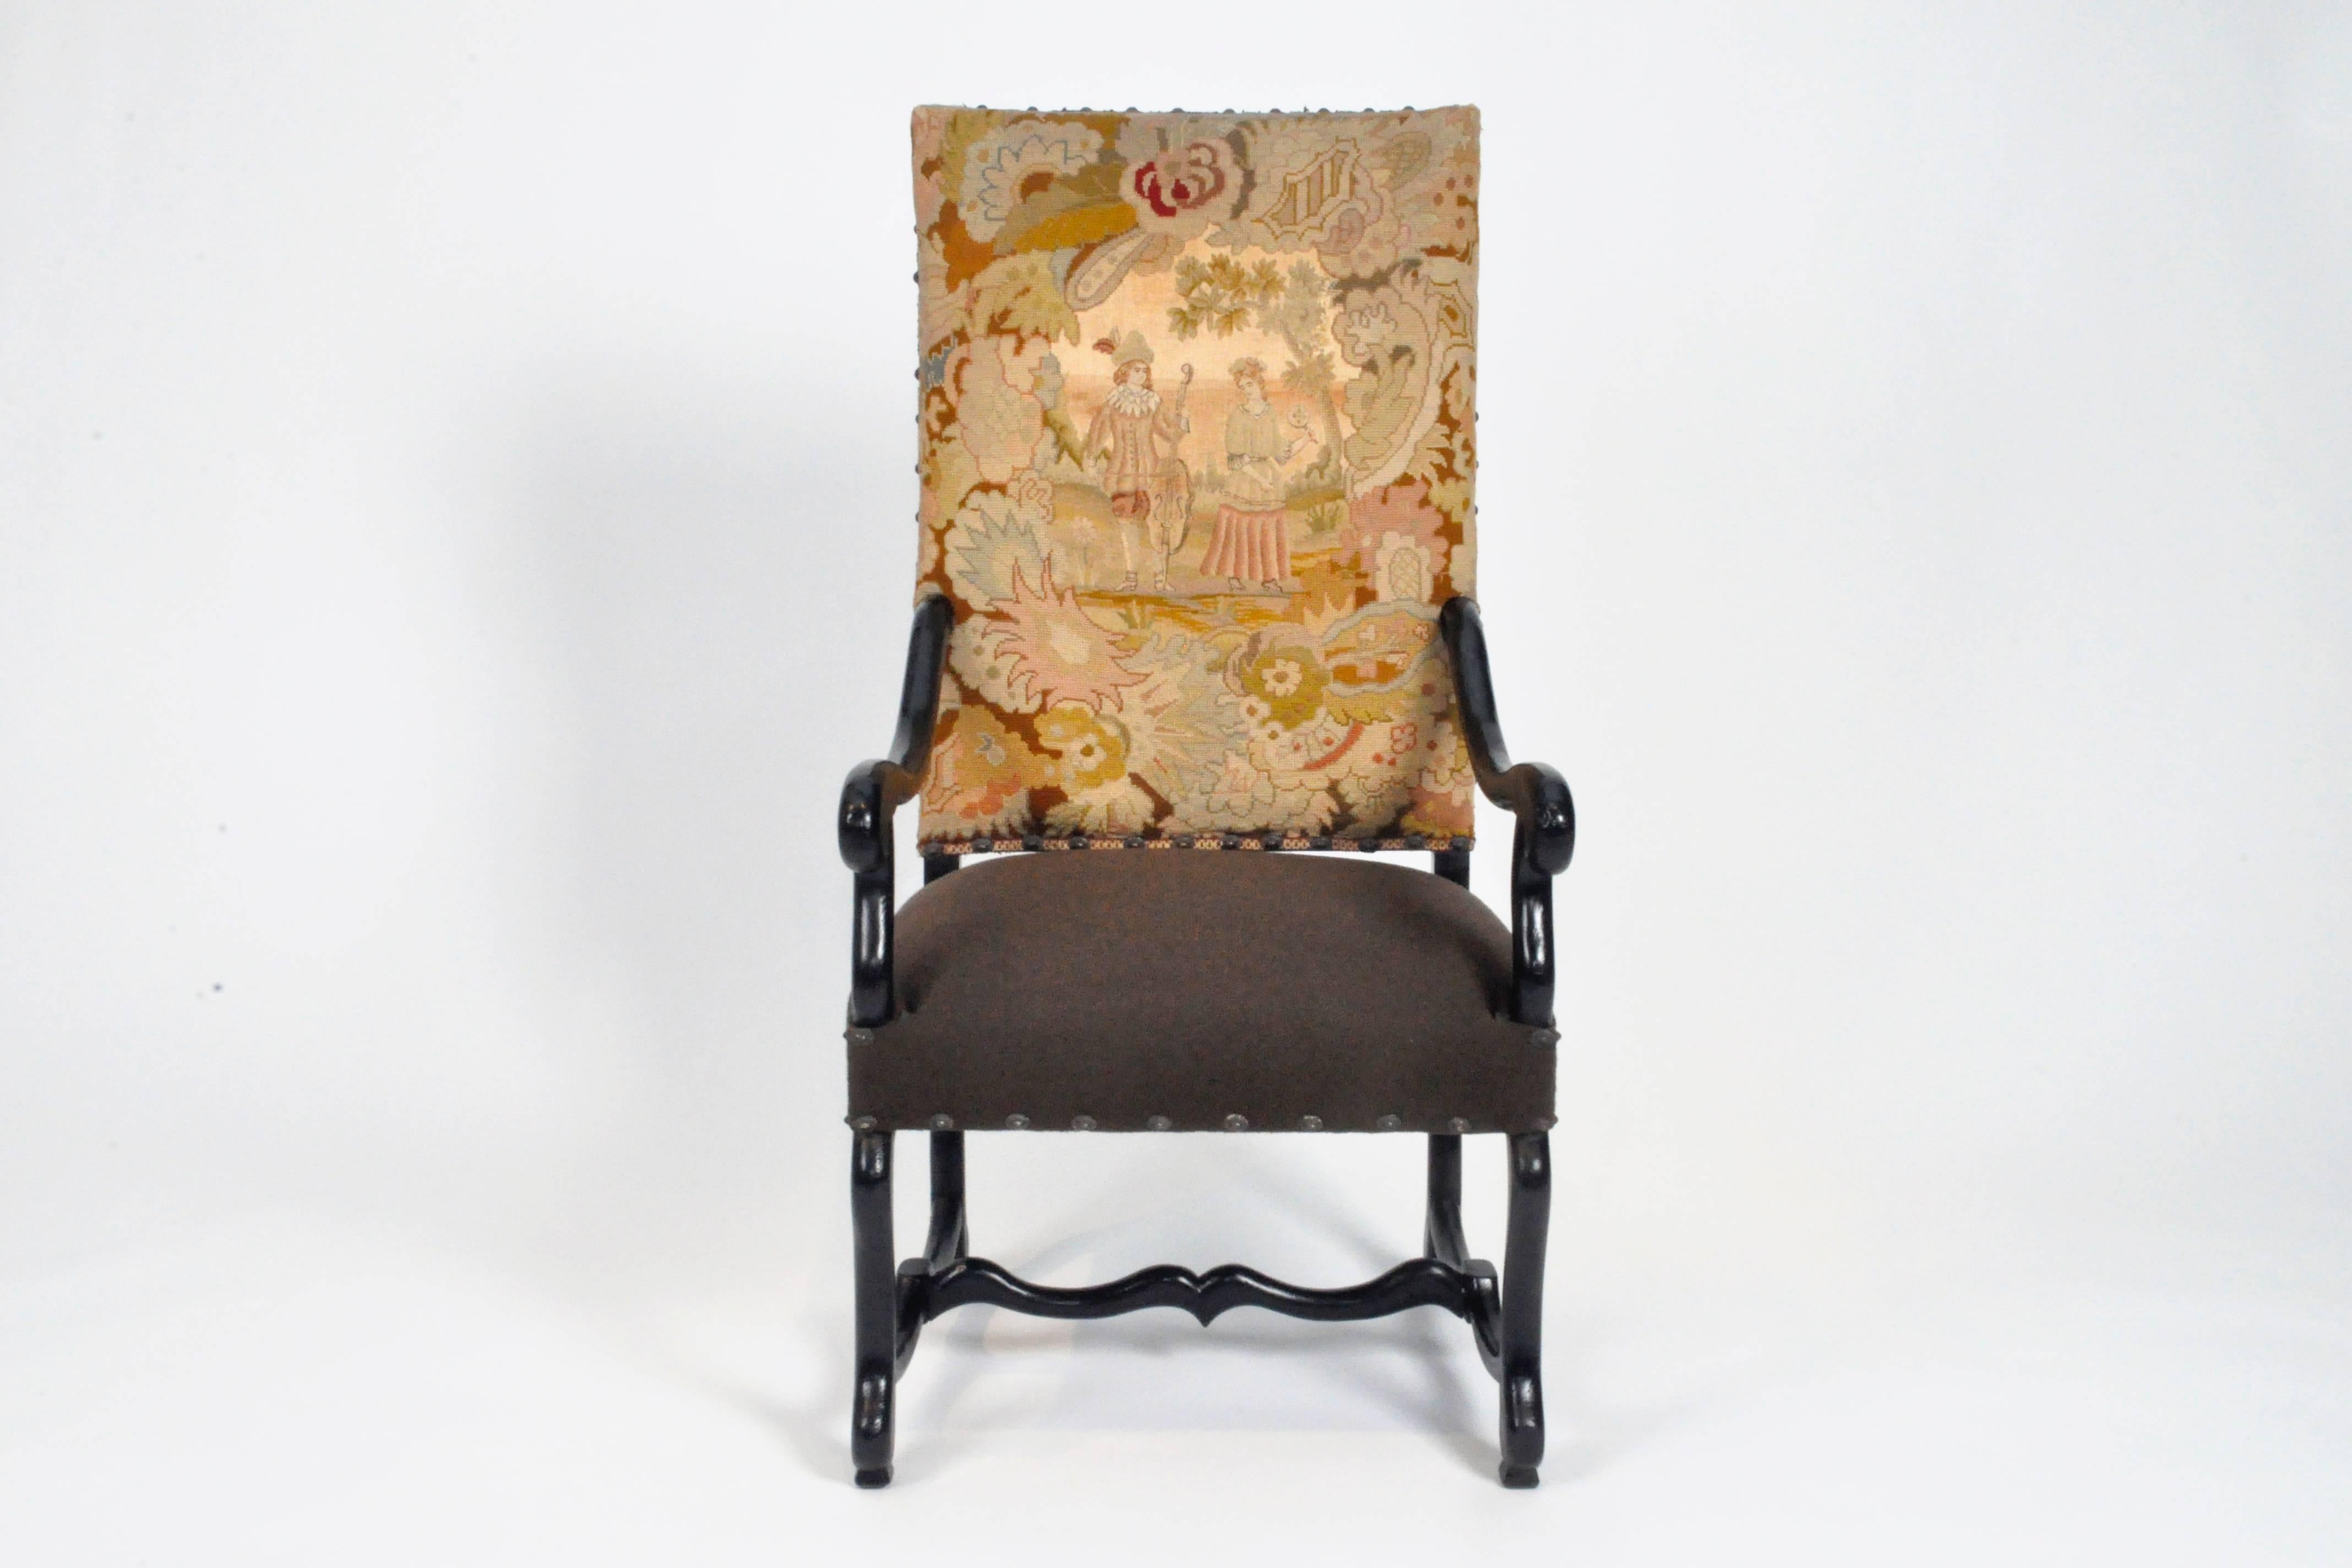 This Fauteuil armchair is from France and is made from walnut wood, circa late 1880's. Old tapestry seat back probable was added in the mid-20th Century. Bottom seat cushion is boiled wool fabric, new. The piece is sturdy and ready to use. 